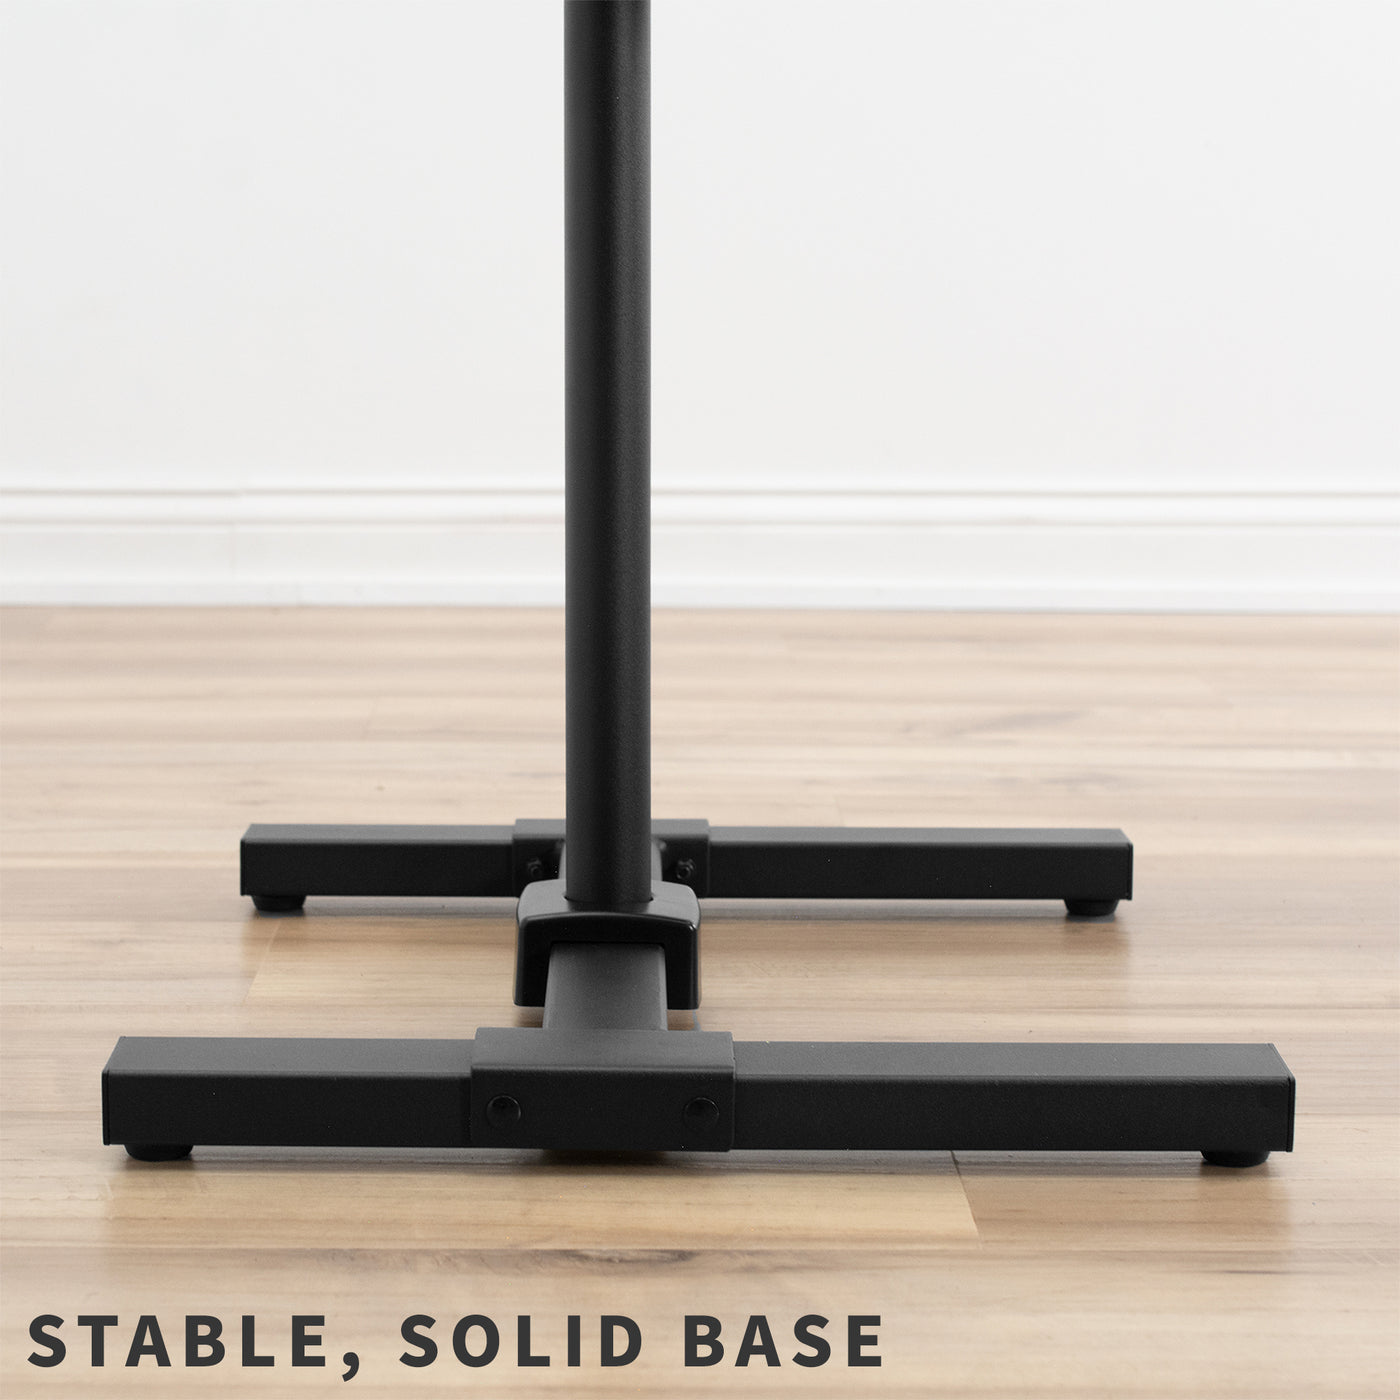 Sturdy height adjustable TV stand with utility shelf and solid stable base.